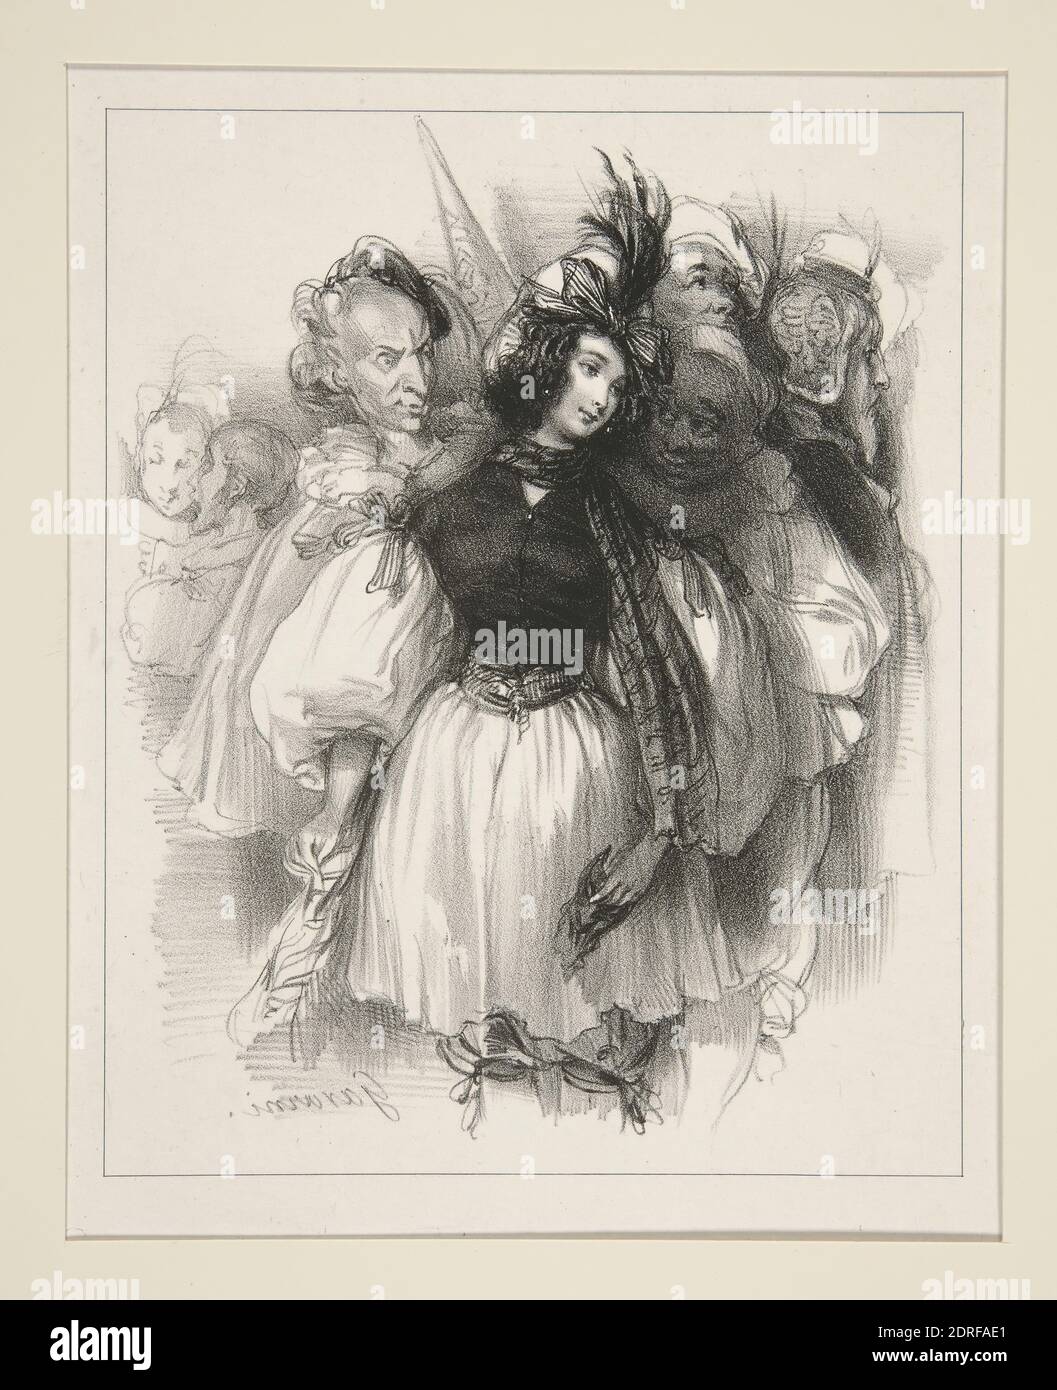 Artist: Paul Gavarni, French, 1804–1866, Le Bal Masque, Lithograph, French, 19th century, Works on Paper - Prints Stock Photo